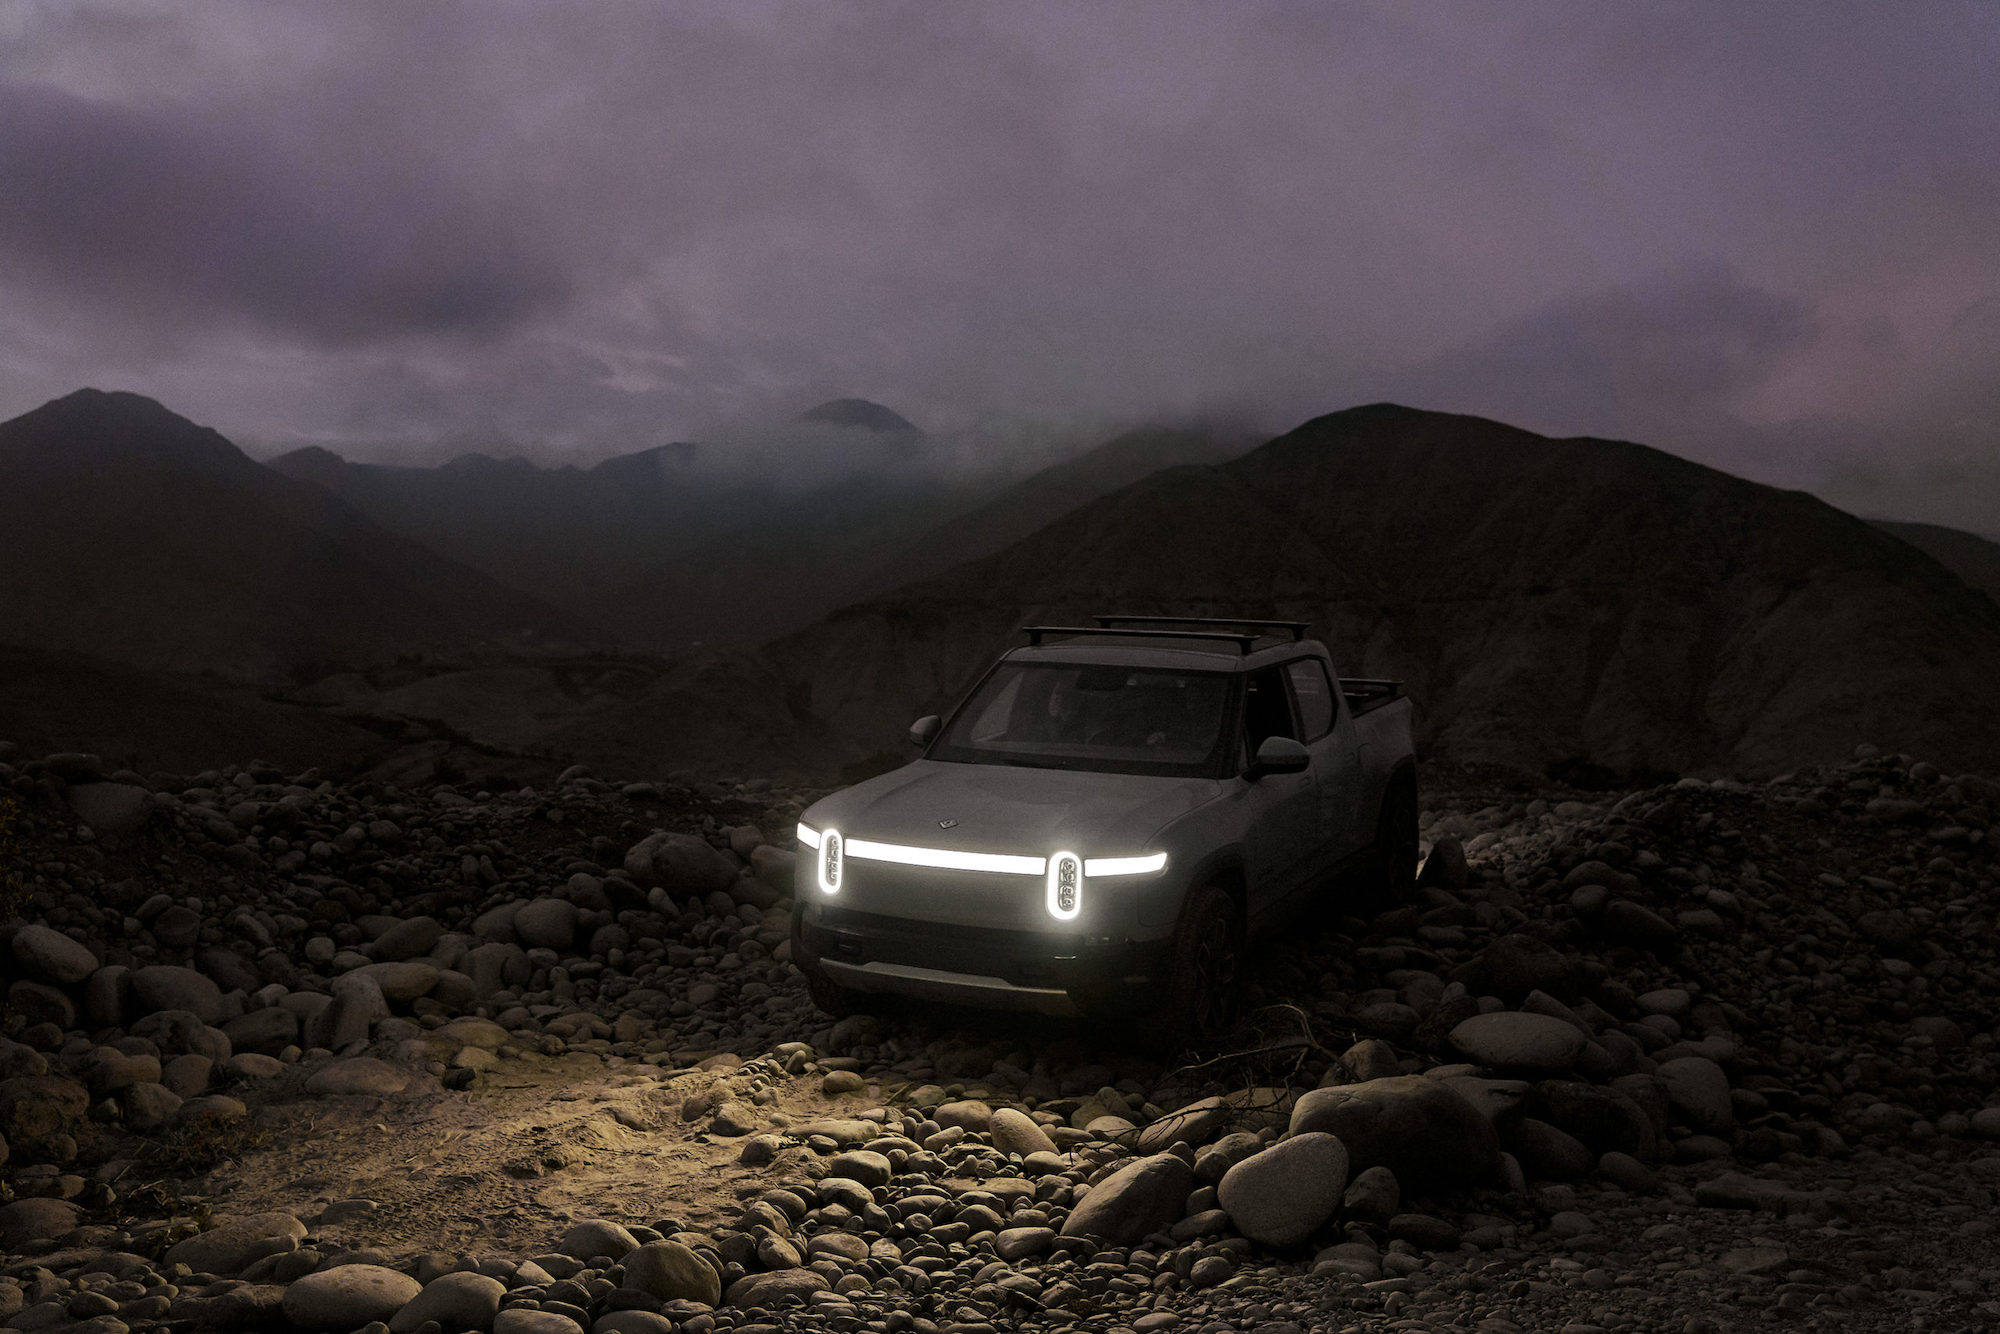 A gray Rivian R1T parked on rocks in front of cloud-shrouded mountains at dusk